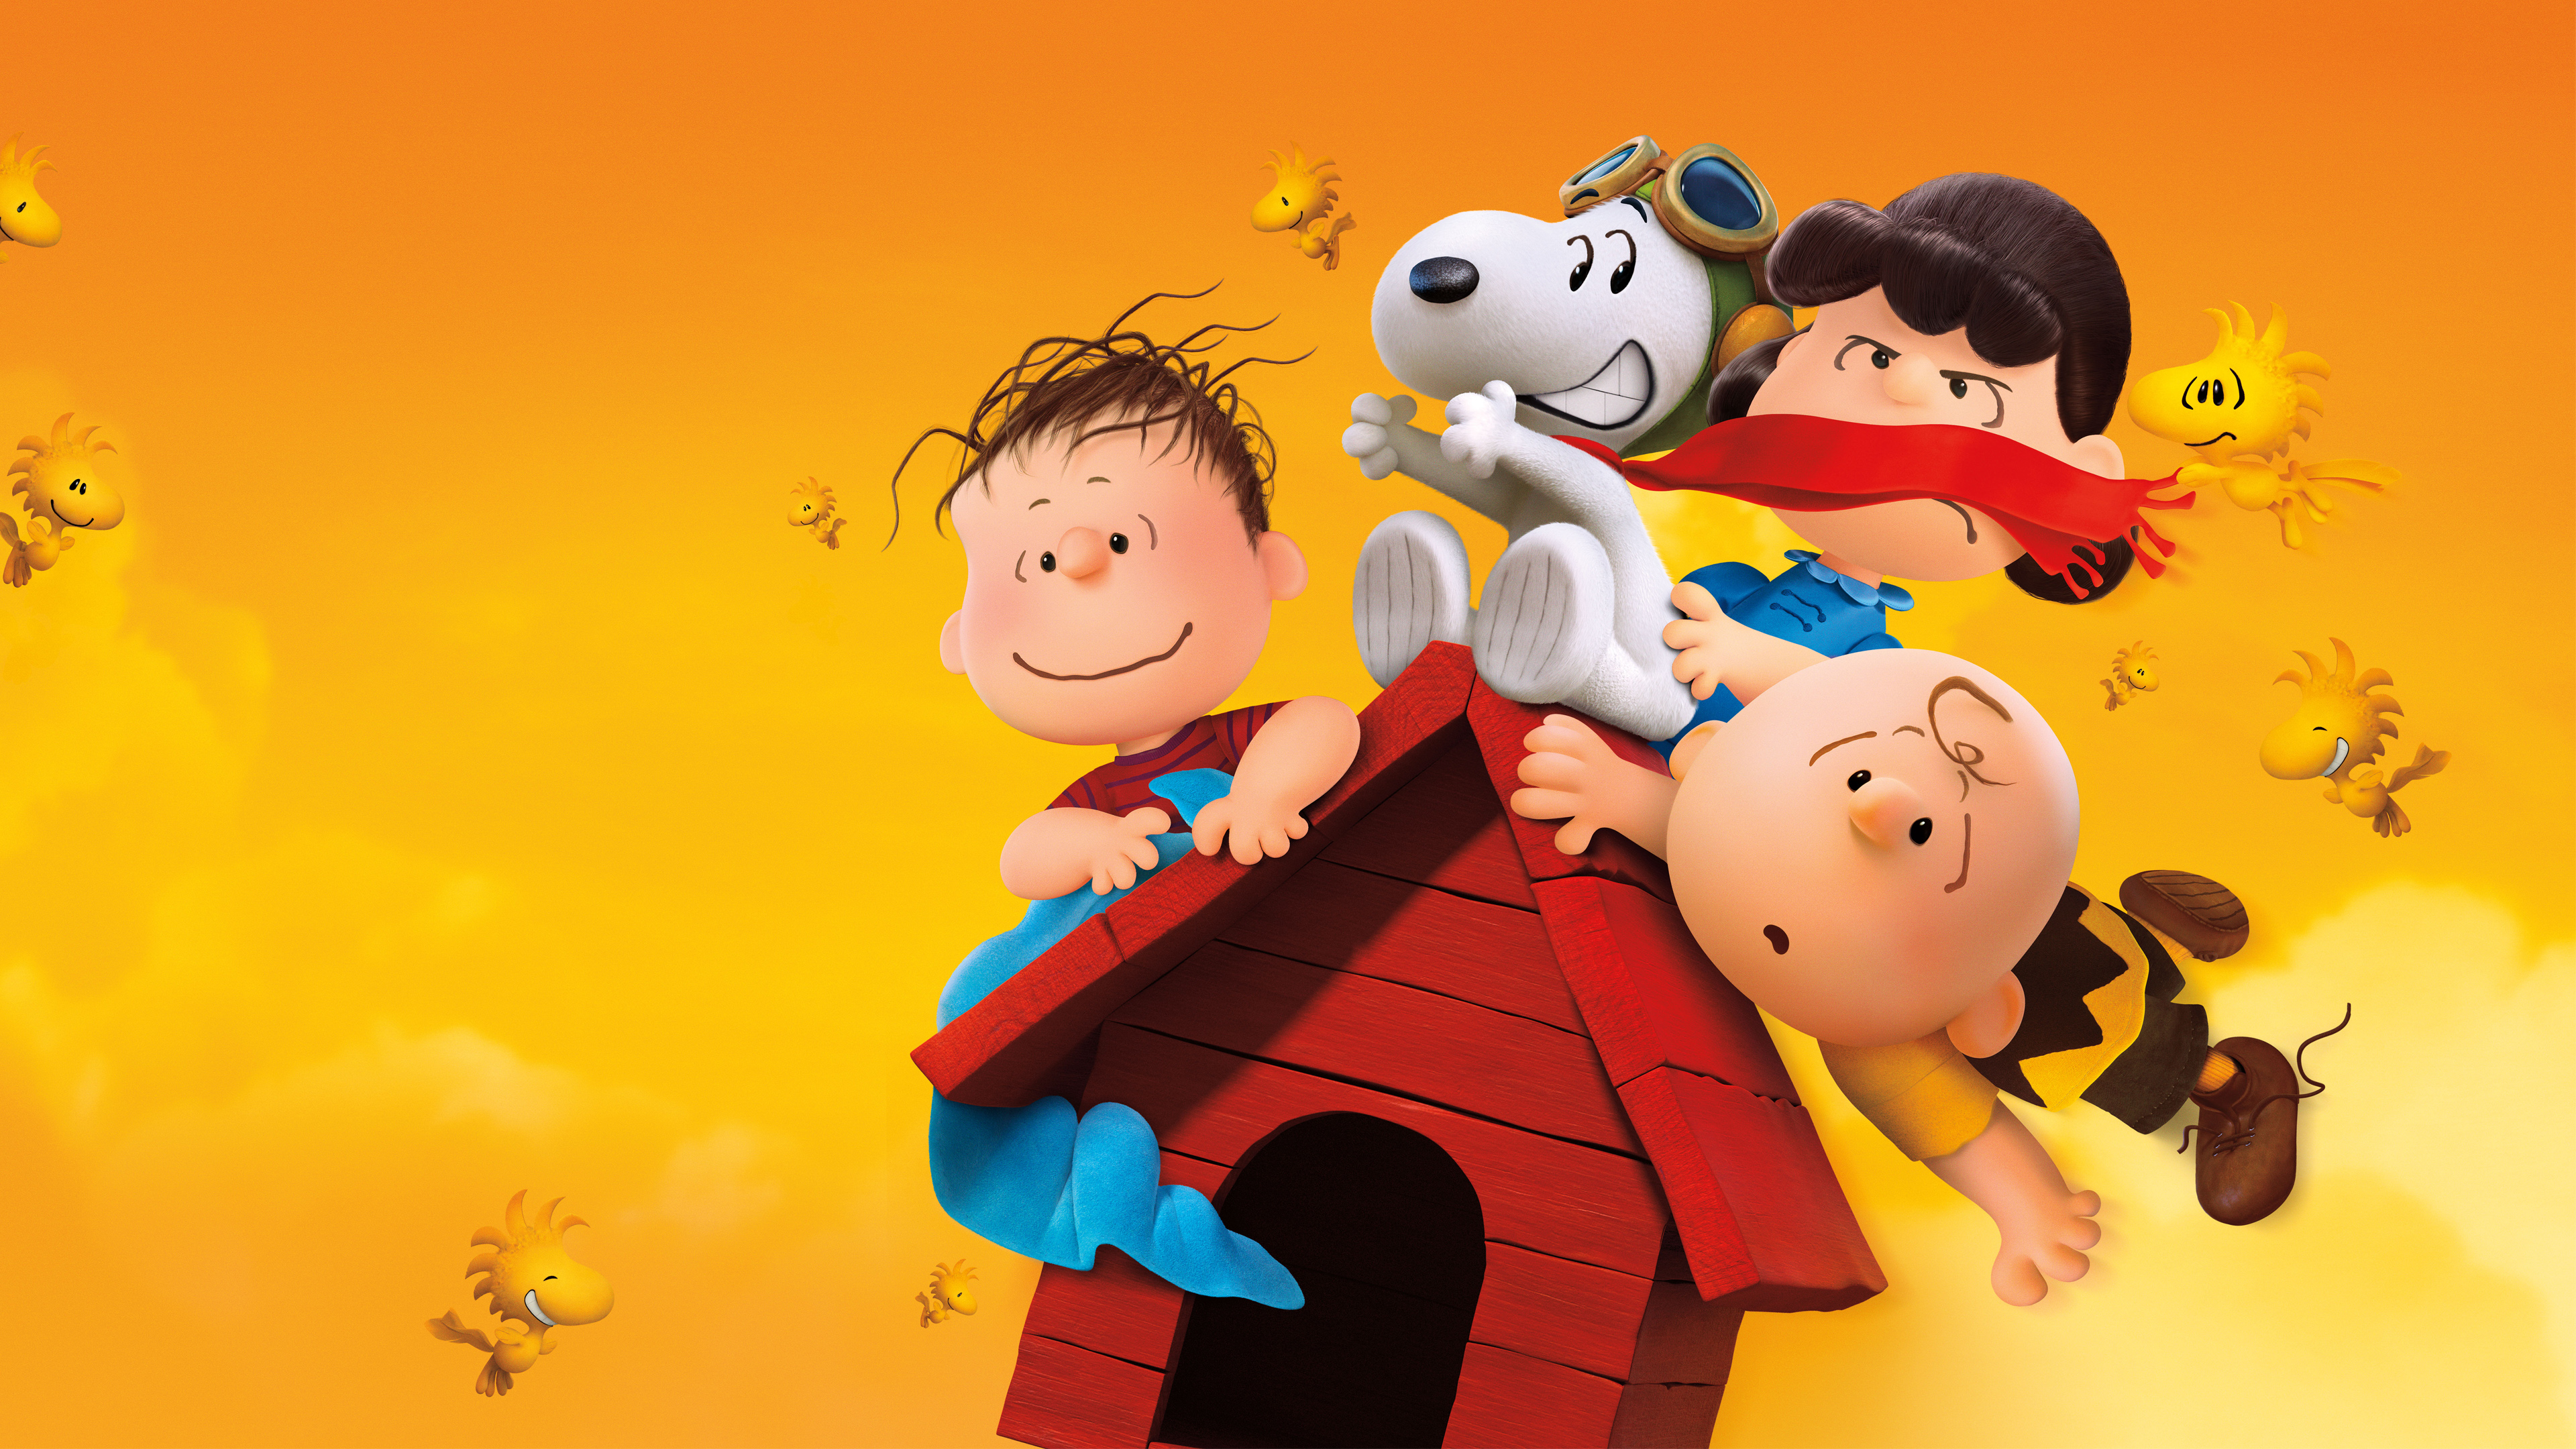 The Peanuts Movie lands in theaters today, November 6. Visit www ...